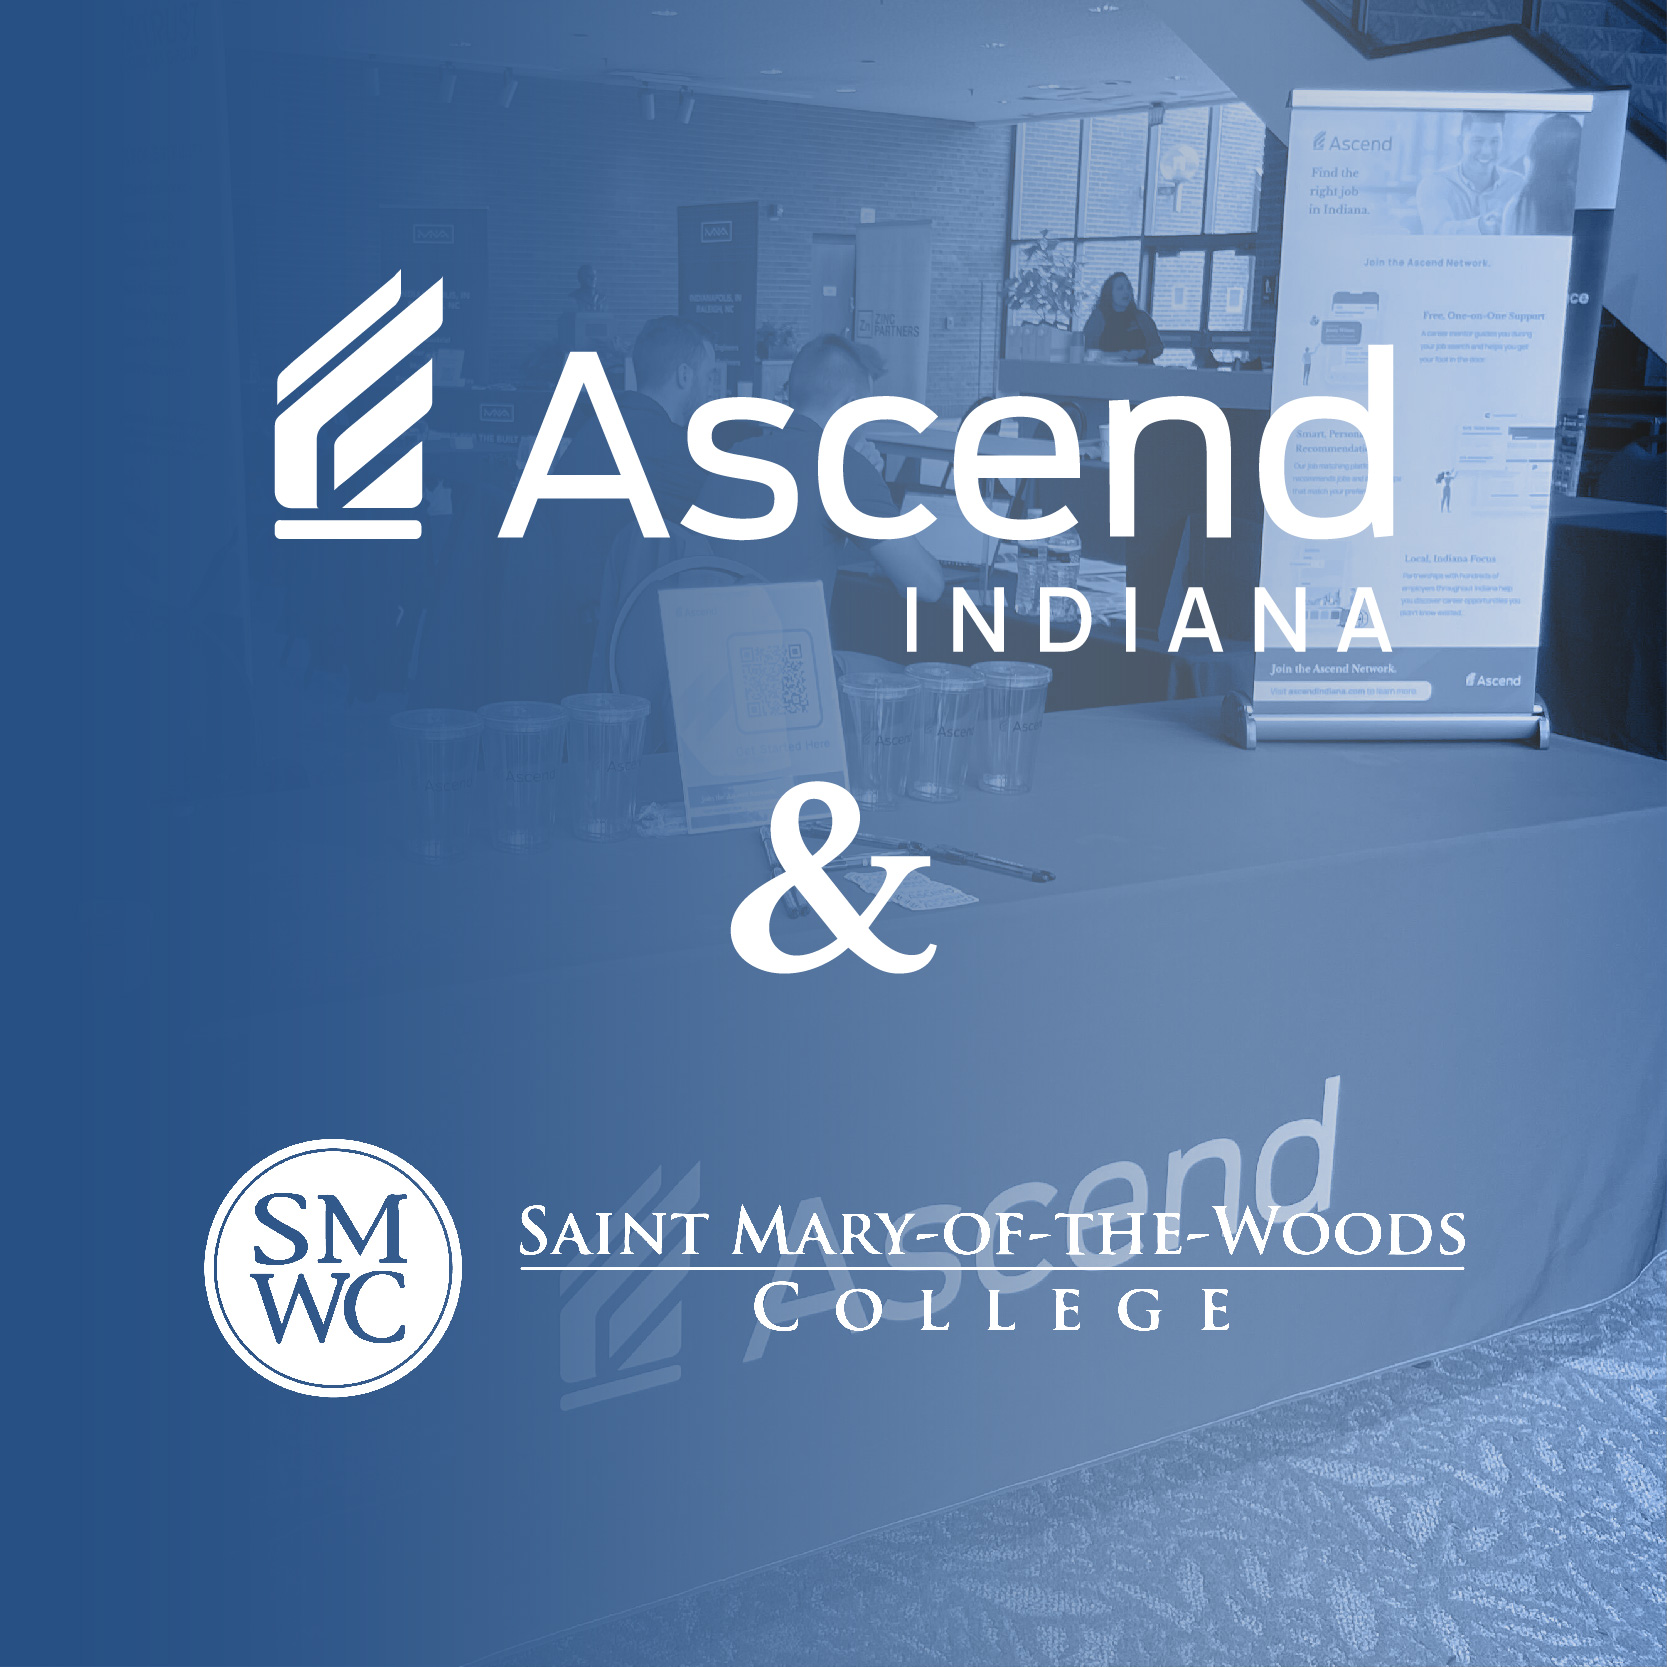 Ascend Indiana partners with Saint Mary-of-the-Woods College